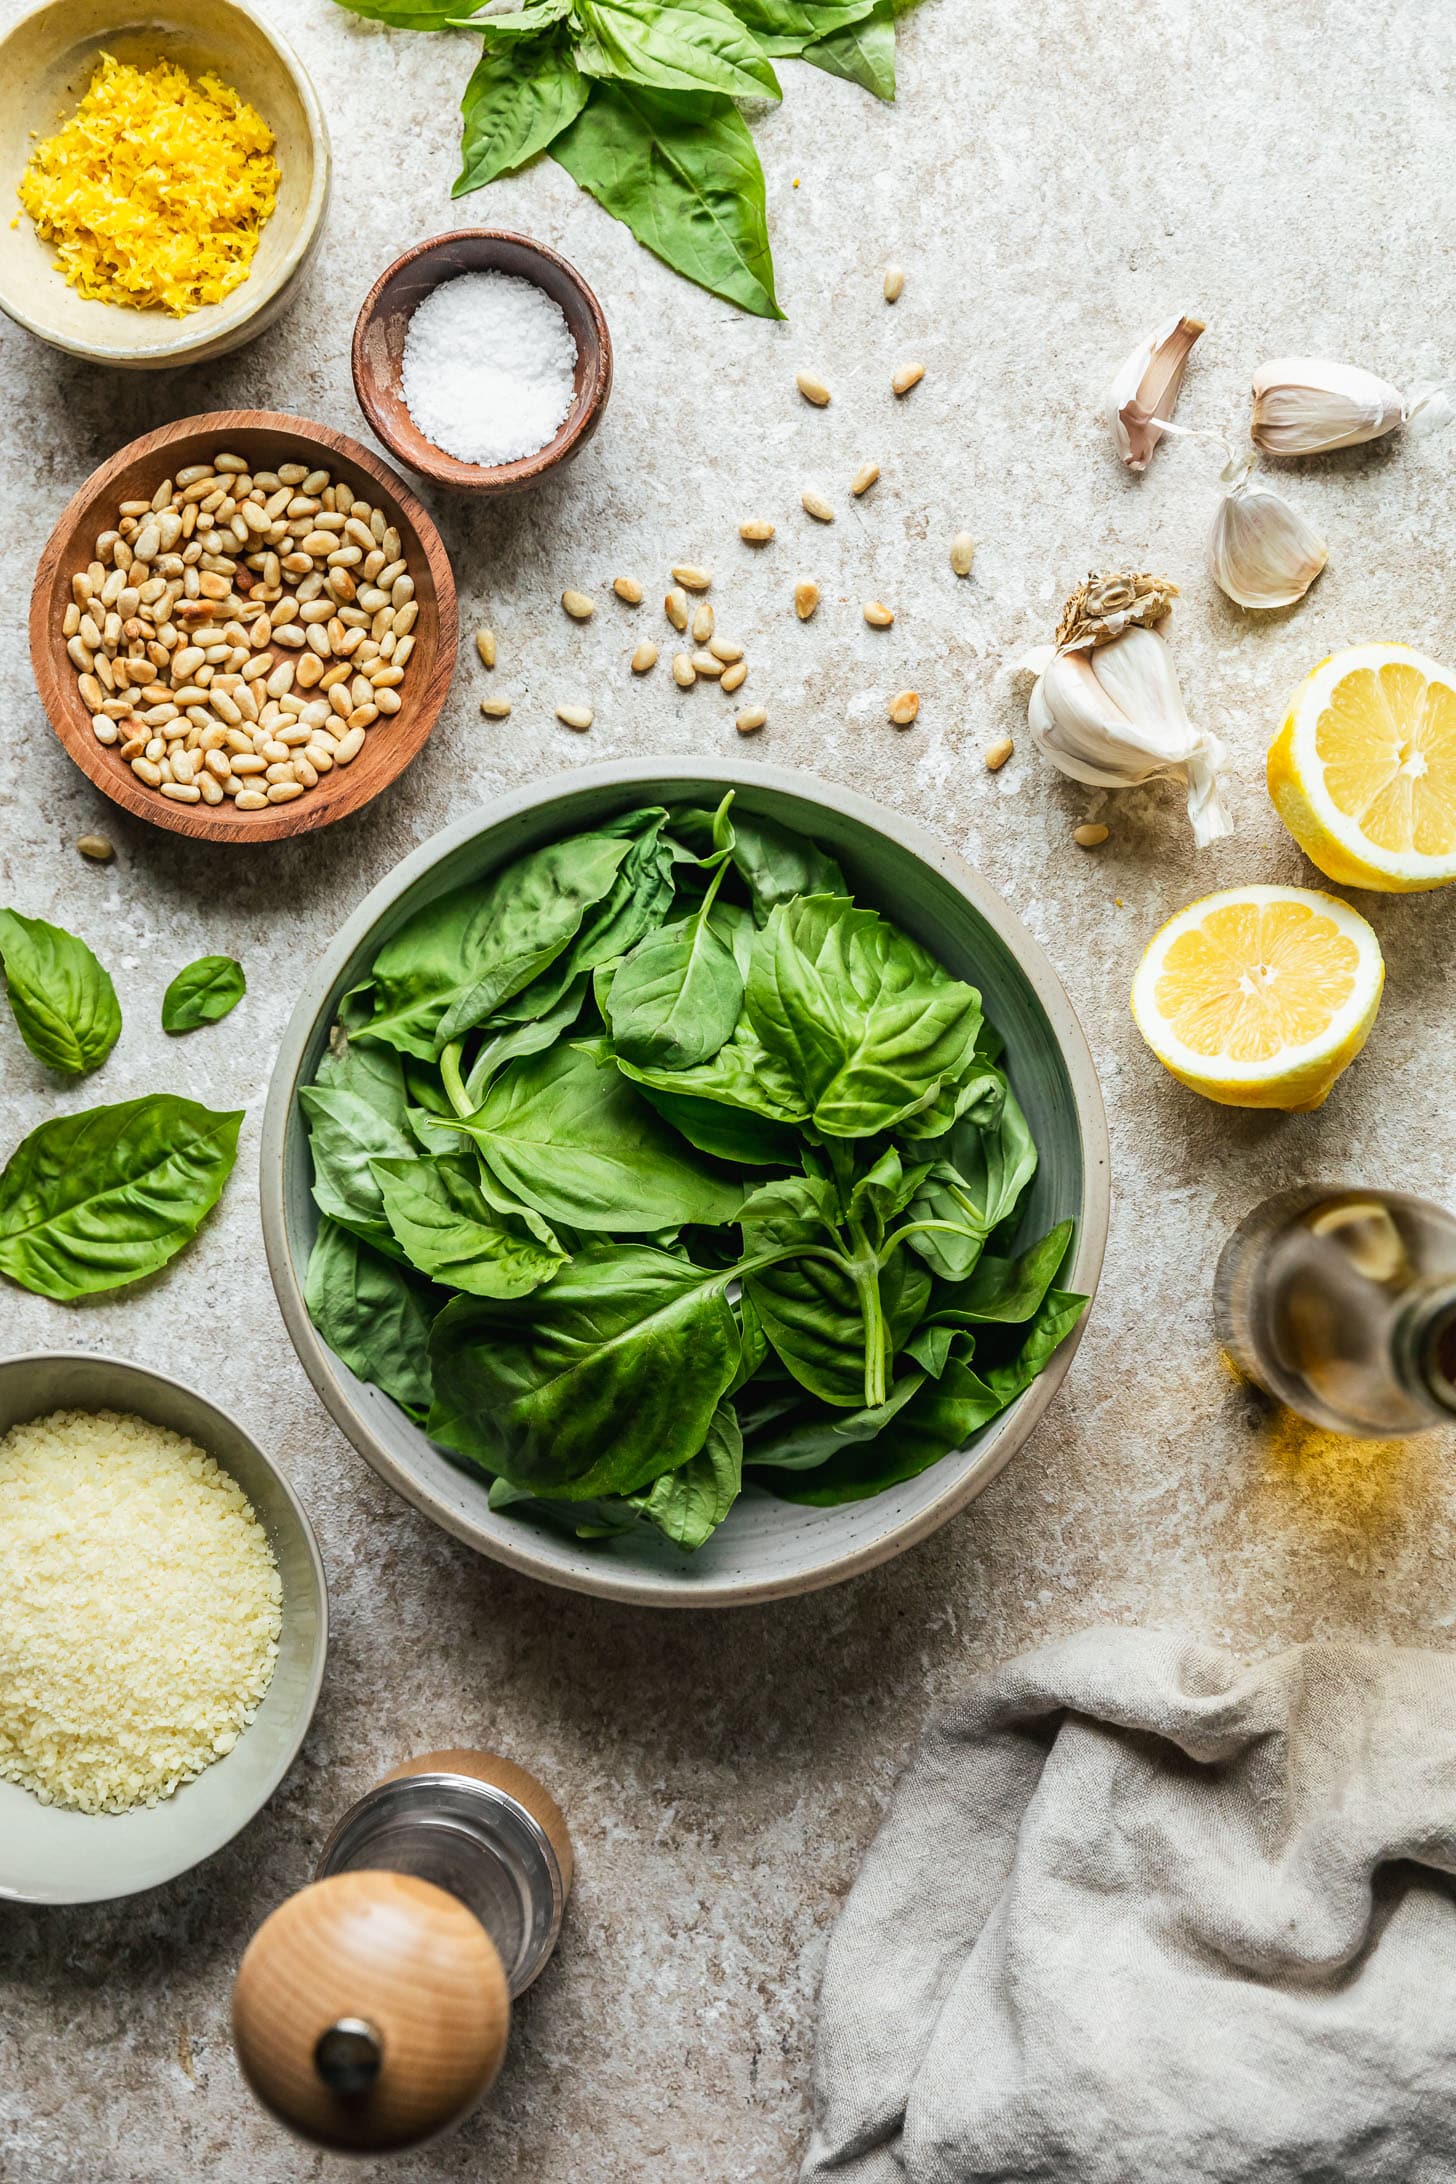 A grey bowl of basil on a beige counter next to halved lemons, a jar of olive oil, a beige linen, a grey bowl of Parmesan, a white bowl of lemon zest, and a wood bowl of pine nuts.